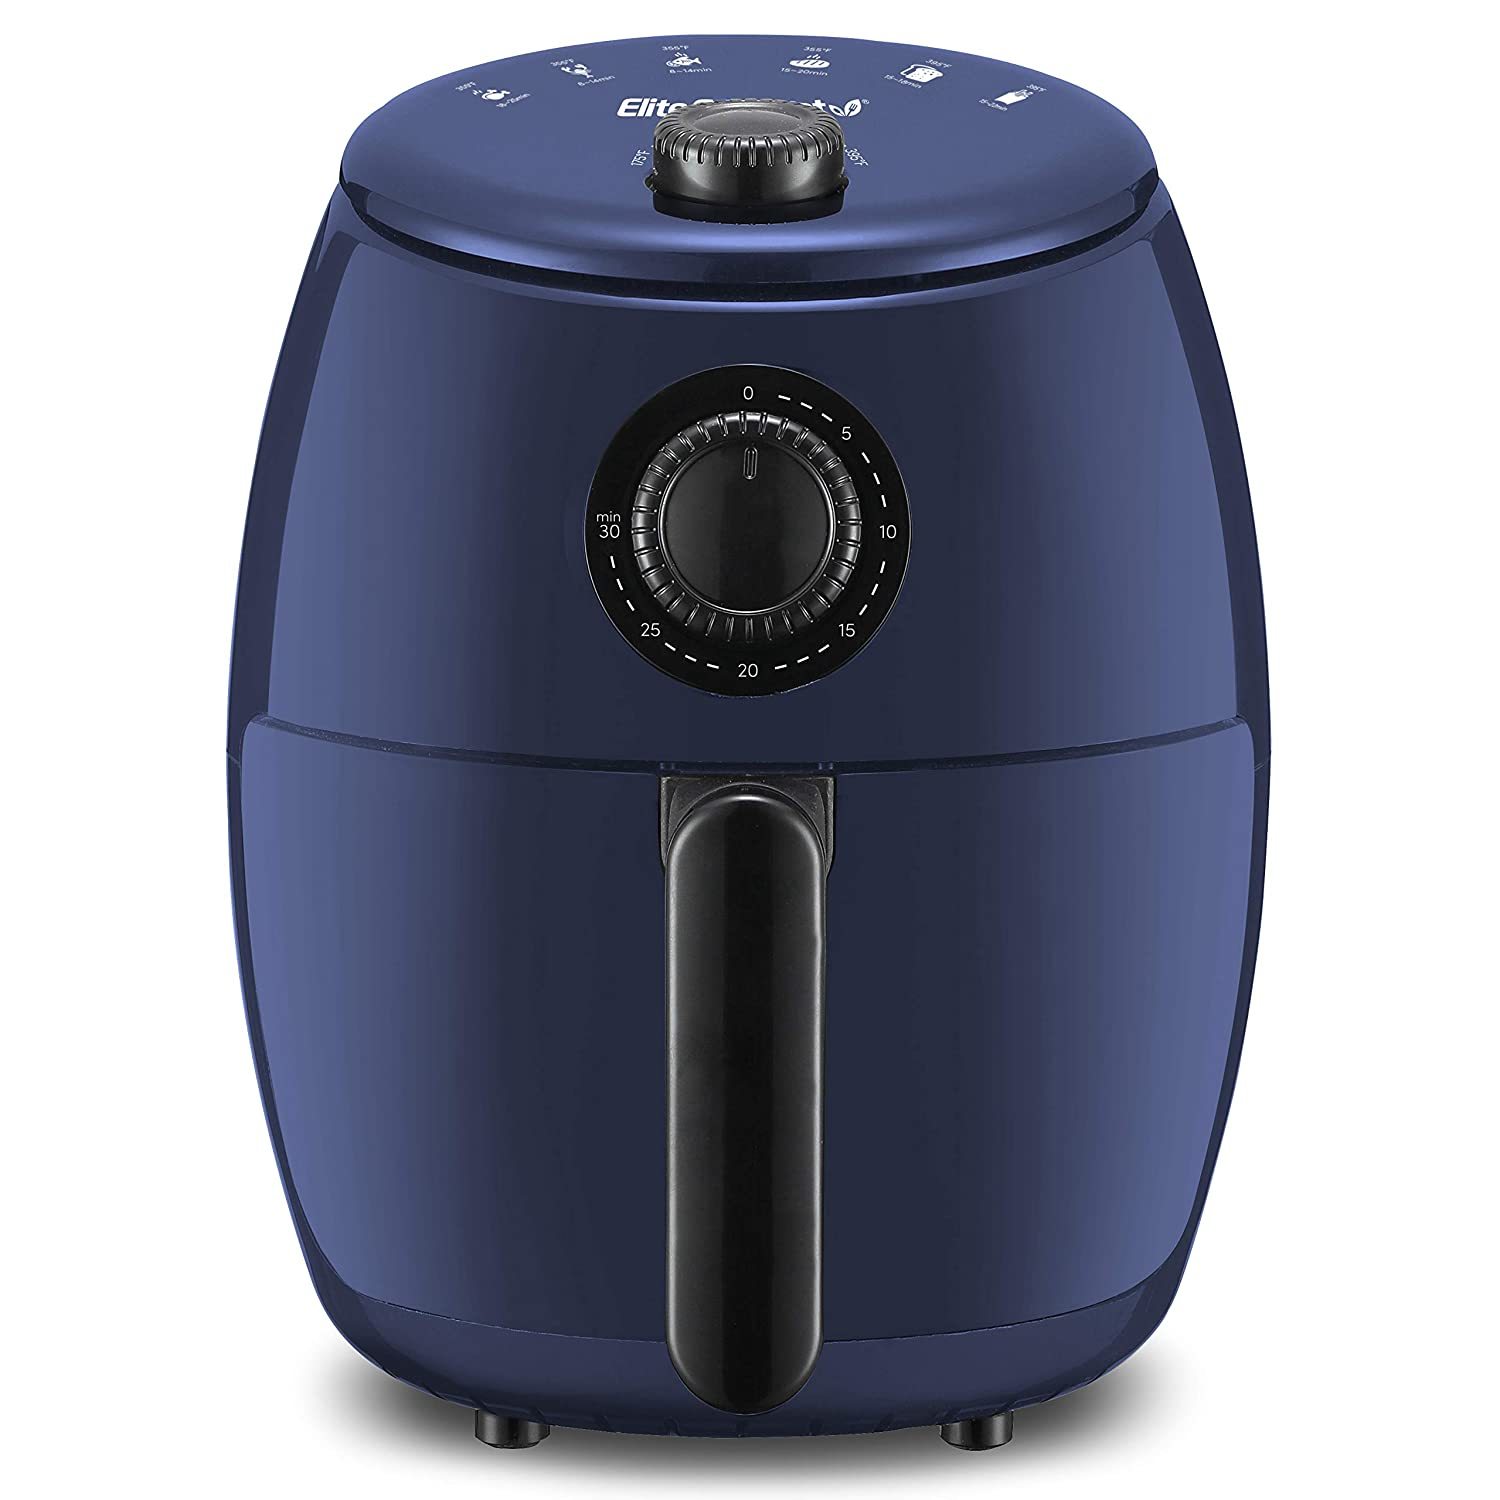 Programmable Air Fryer with 8 Cook Presets, GW22638 - Black